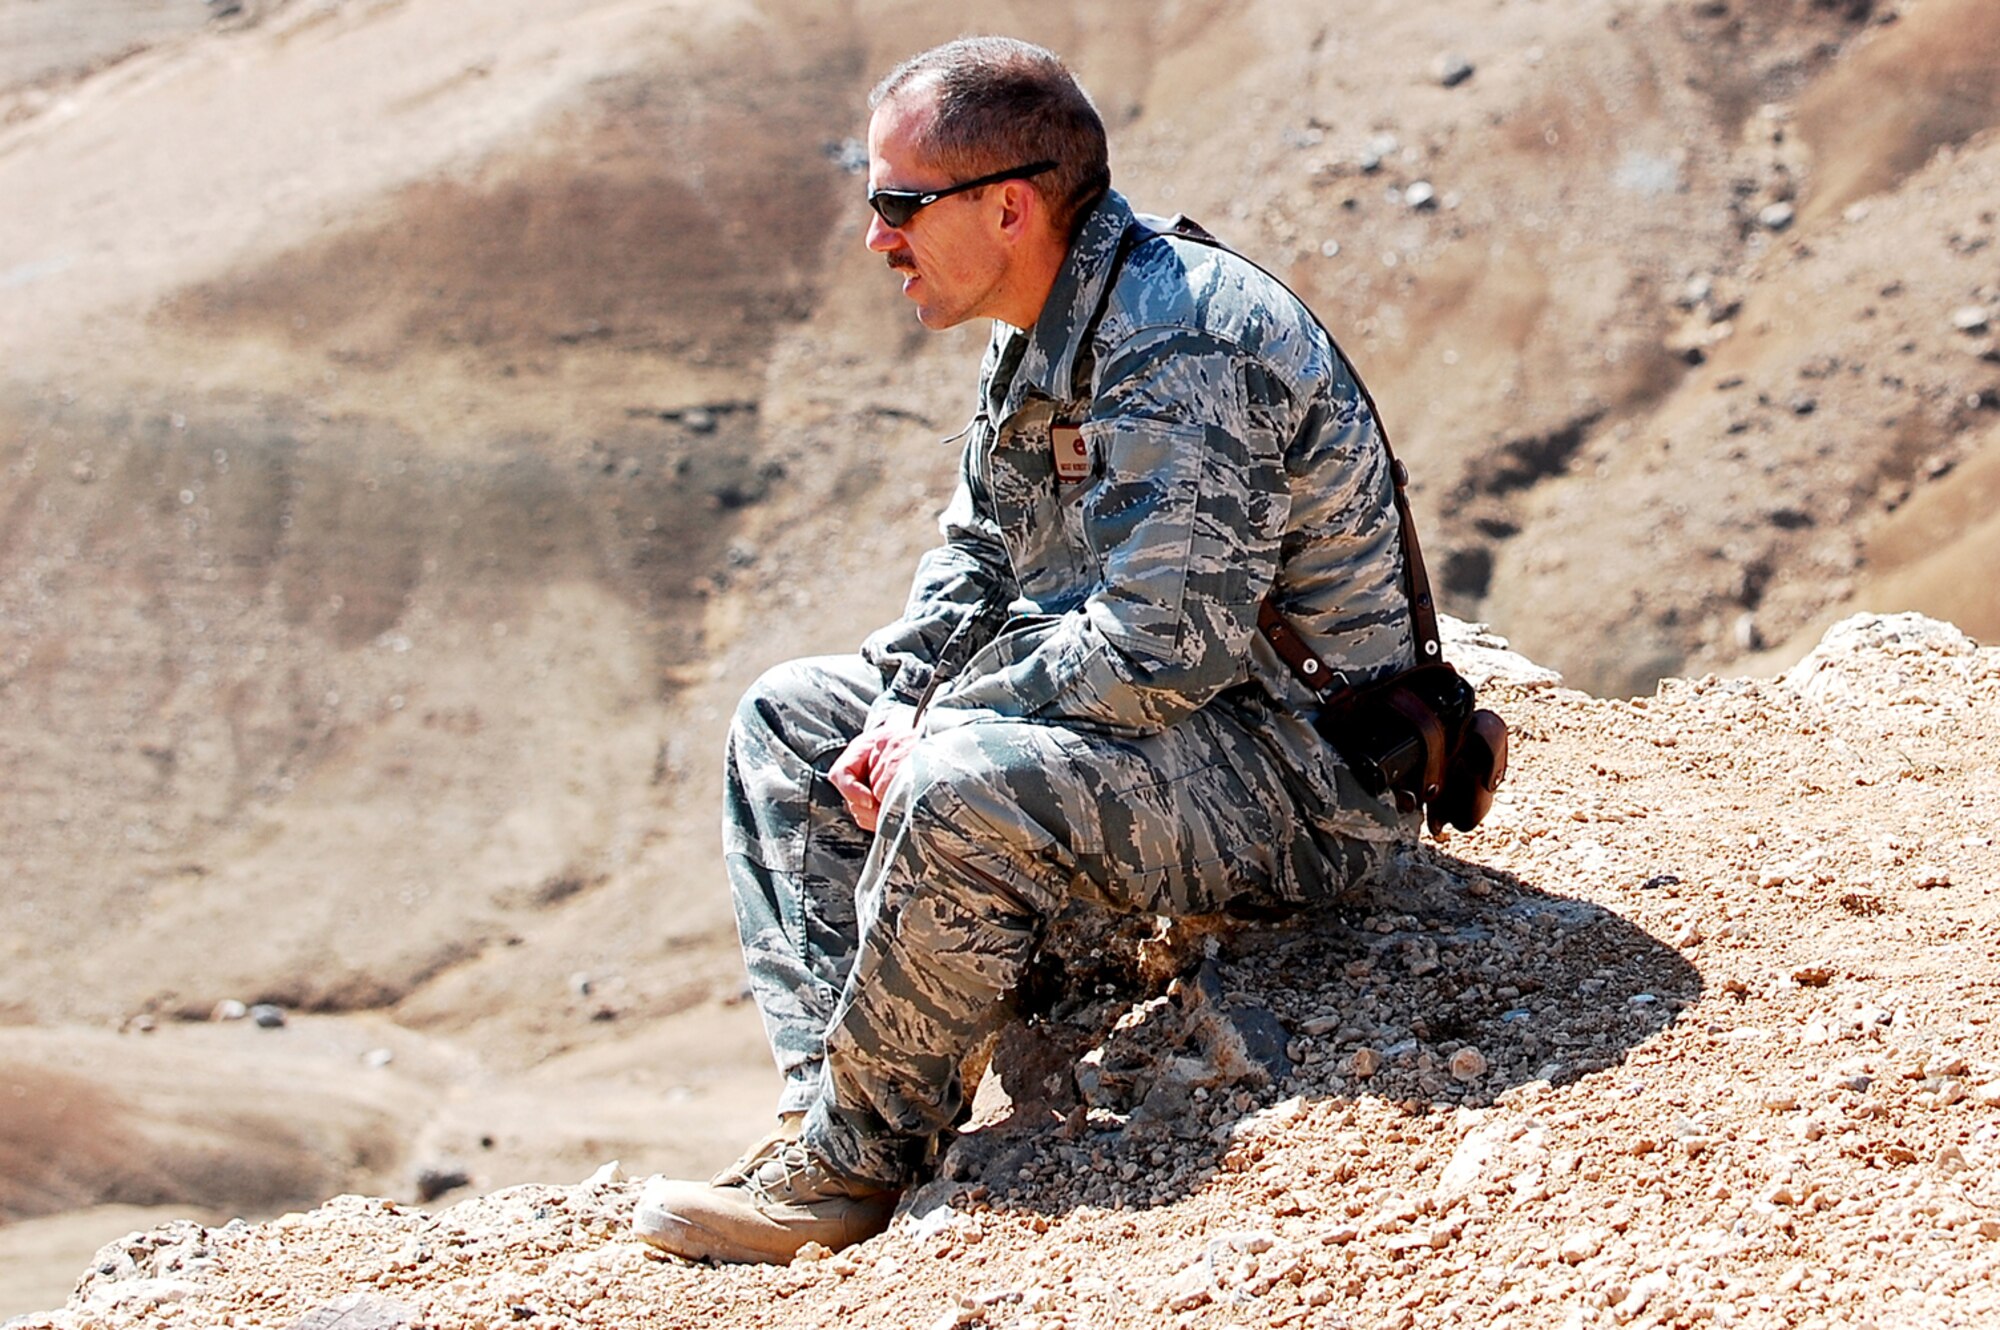 KABUL INTERNATIONAL AIRPORT, Afghanistan -- Master Sgt. Robert Van De Hey waits to observe helicopters firing their rockets during live-fire training as part of his range safety officer duties while deployed.